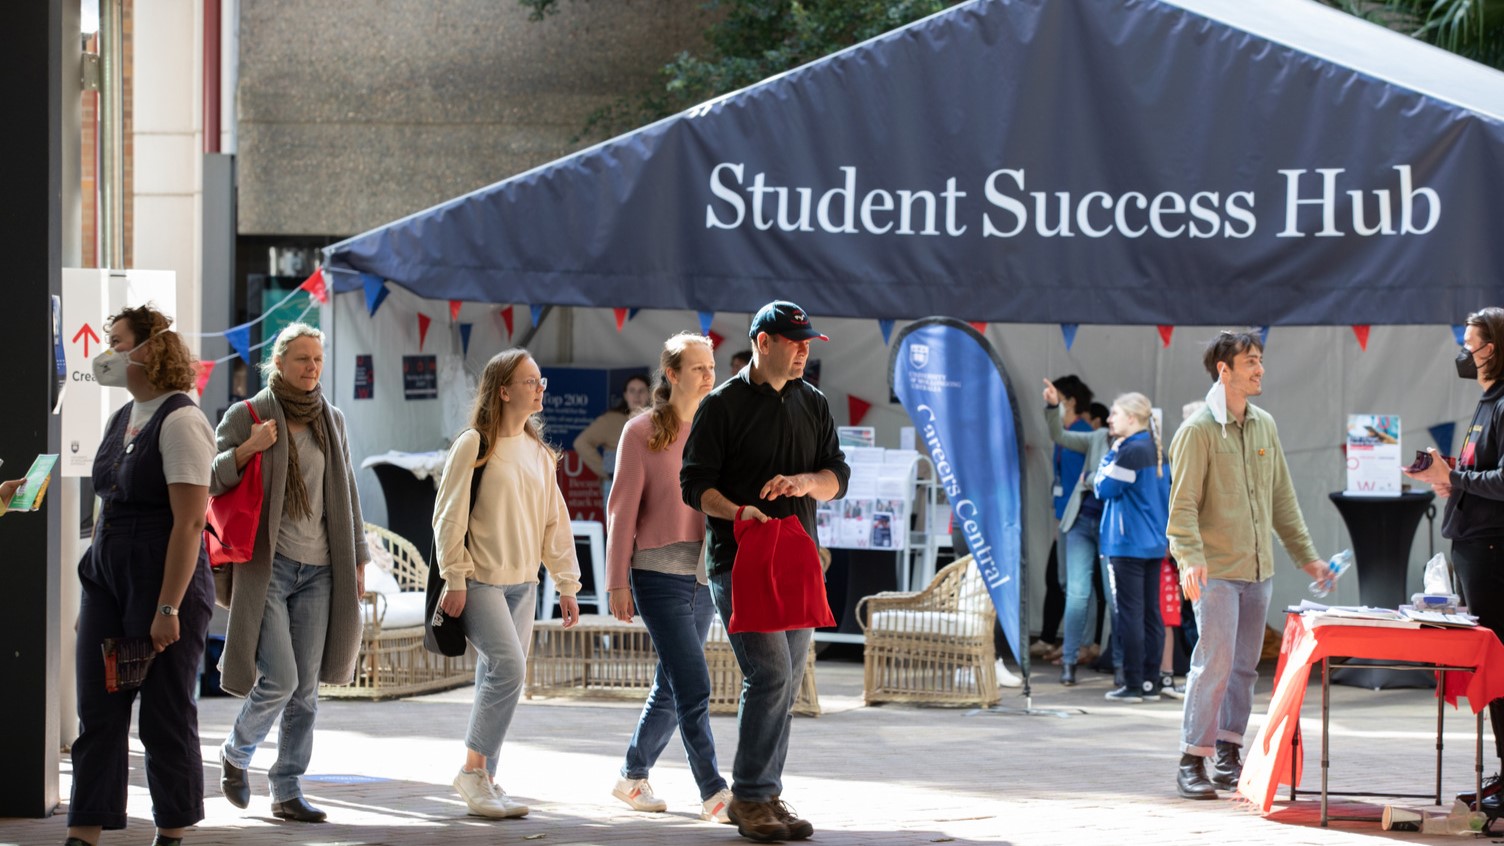 Students on walking campus with the Student Success Hub information tent in the background